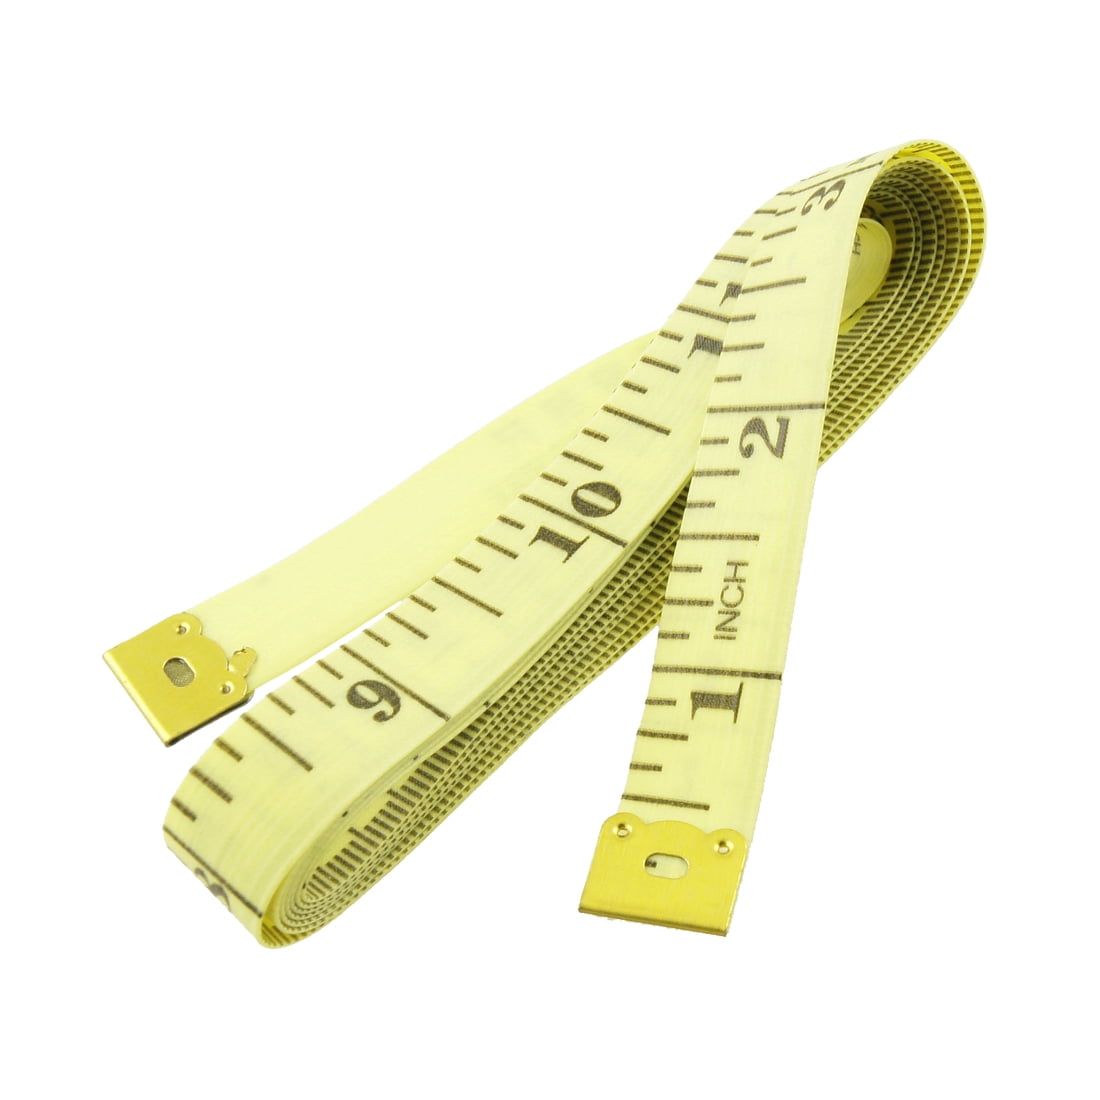 4 Pcs White Yellow Plastic Sewing Tailor Soft Ruler Tape Measure 1.5m 60" 